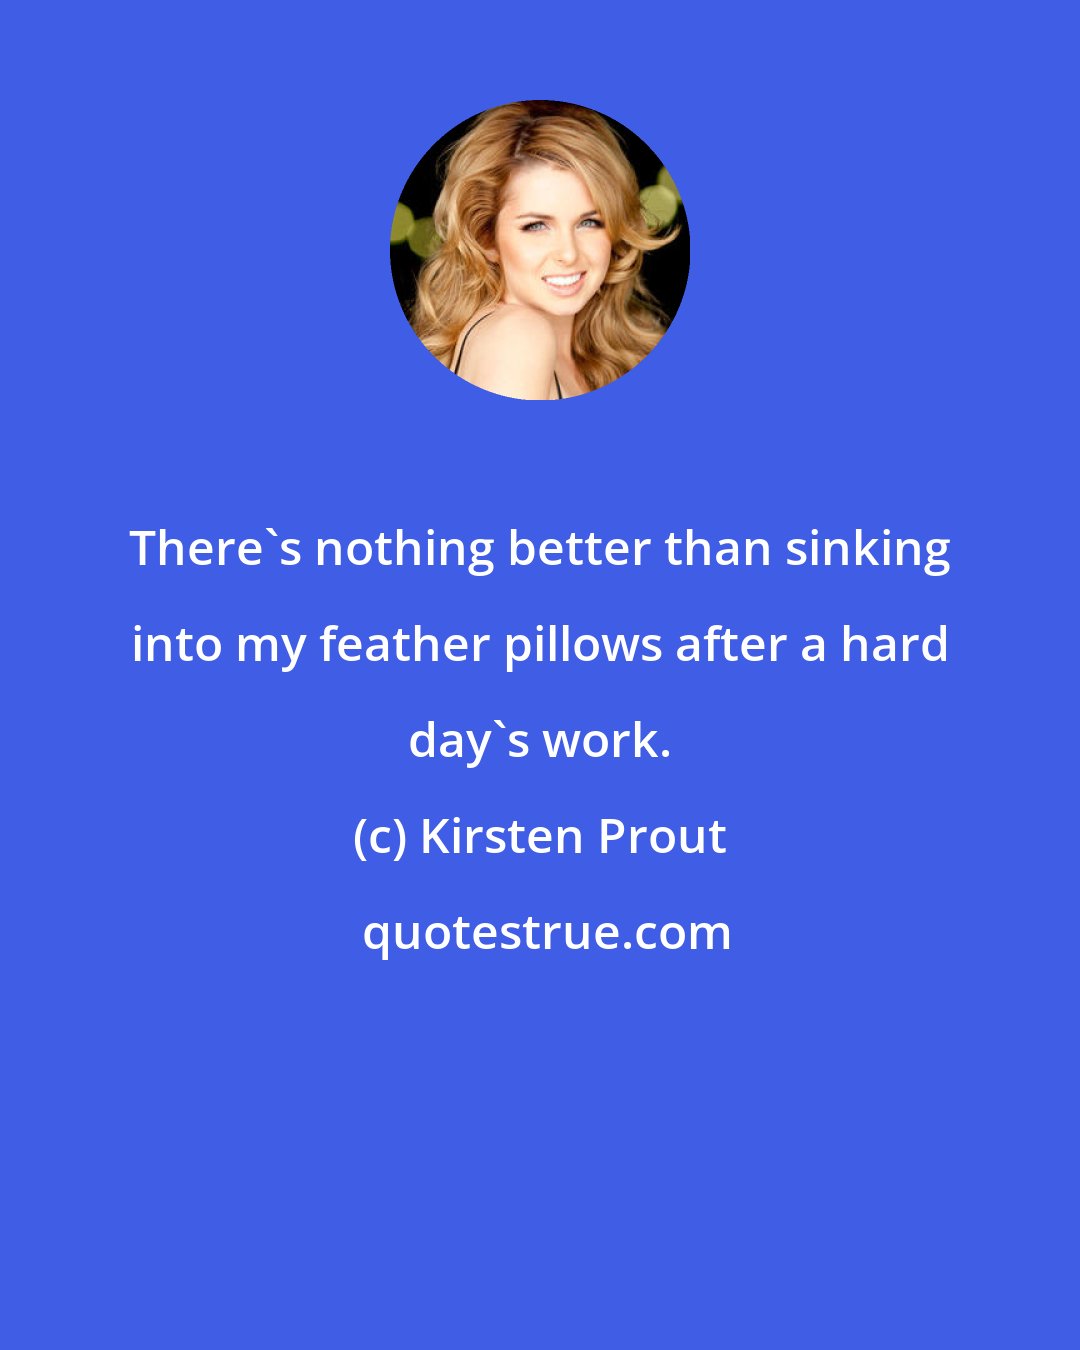 Kirsten Prout: There's nothing better than sinking into my feather pillows after a hard day's work.